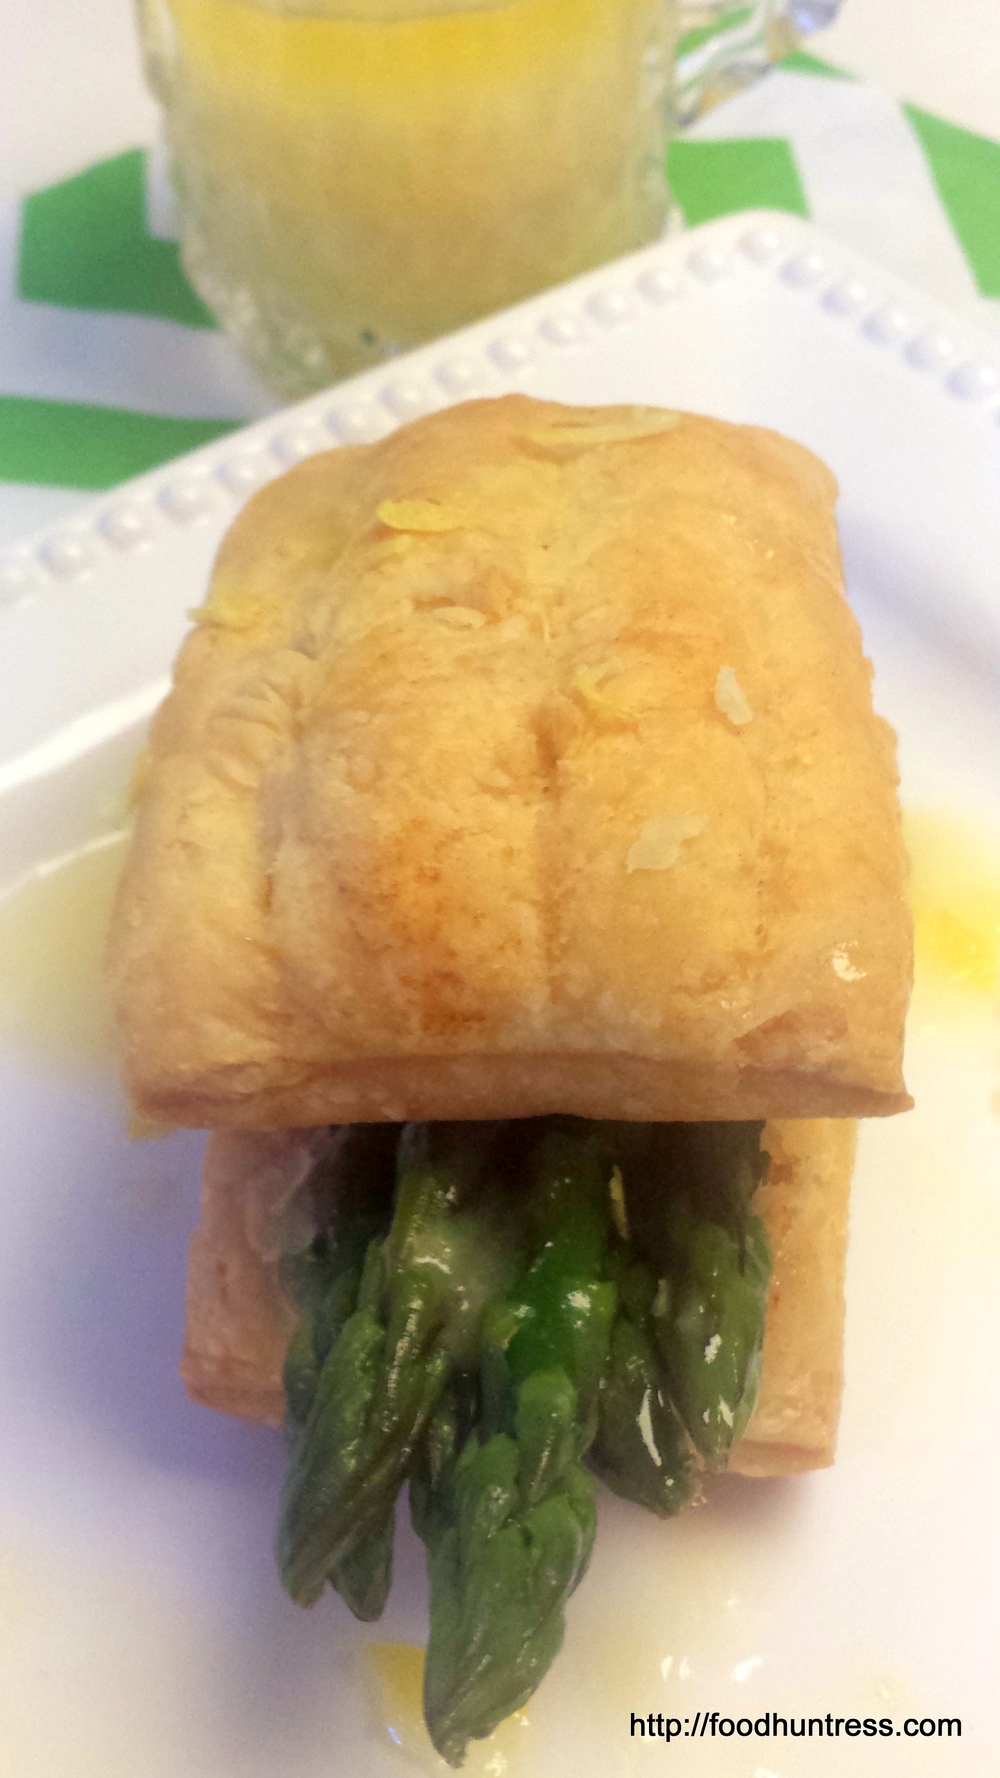 Asparagus+Tips+in+Puff+Pastry+with+Lemon+Butter+Sauce Asparagus Tips in Puff Pastry with Lemon Butter